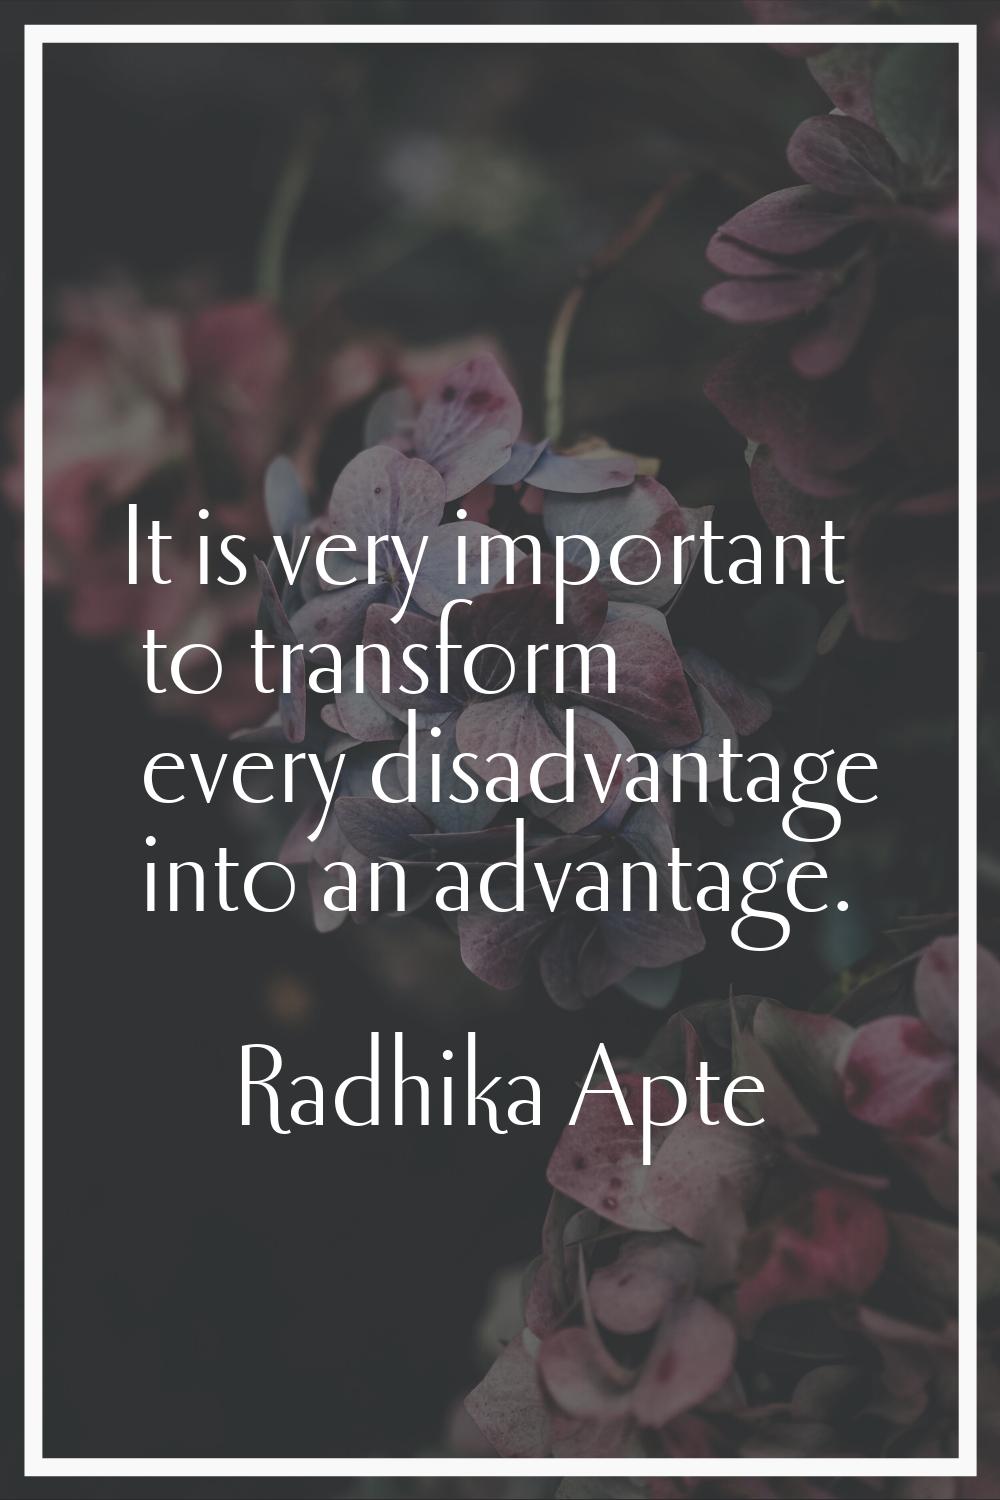 It is very important to transform every disadvantage into an advantage.